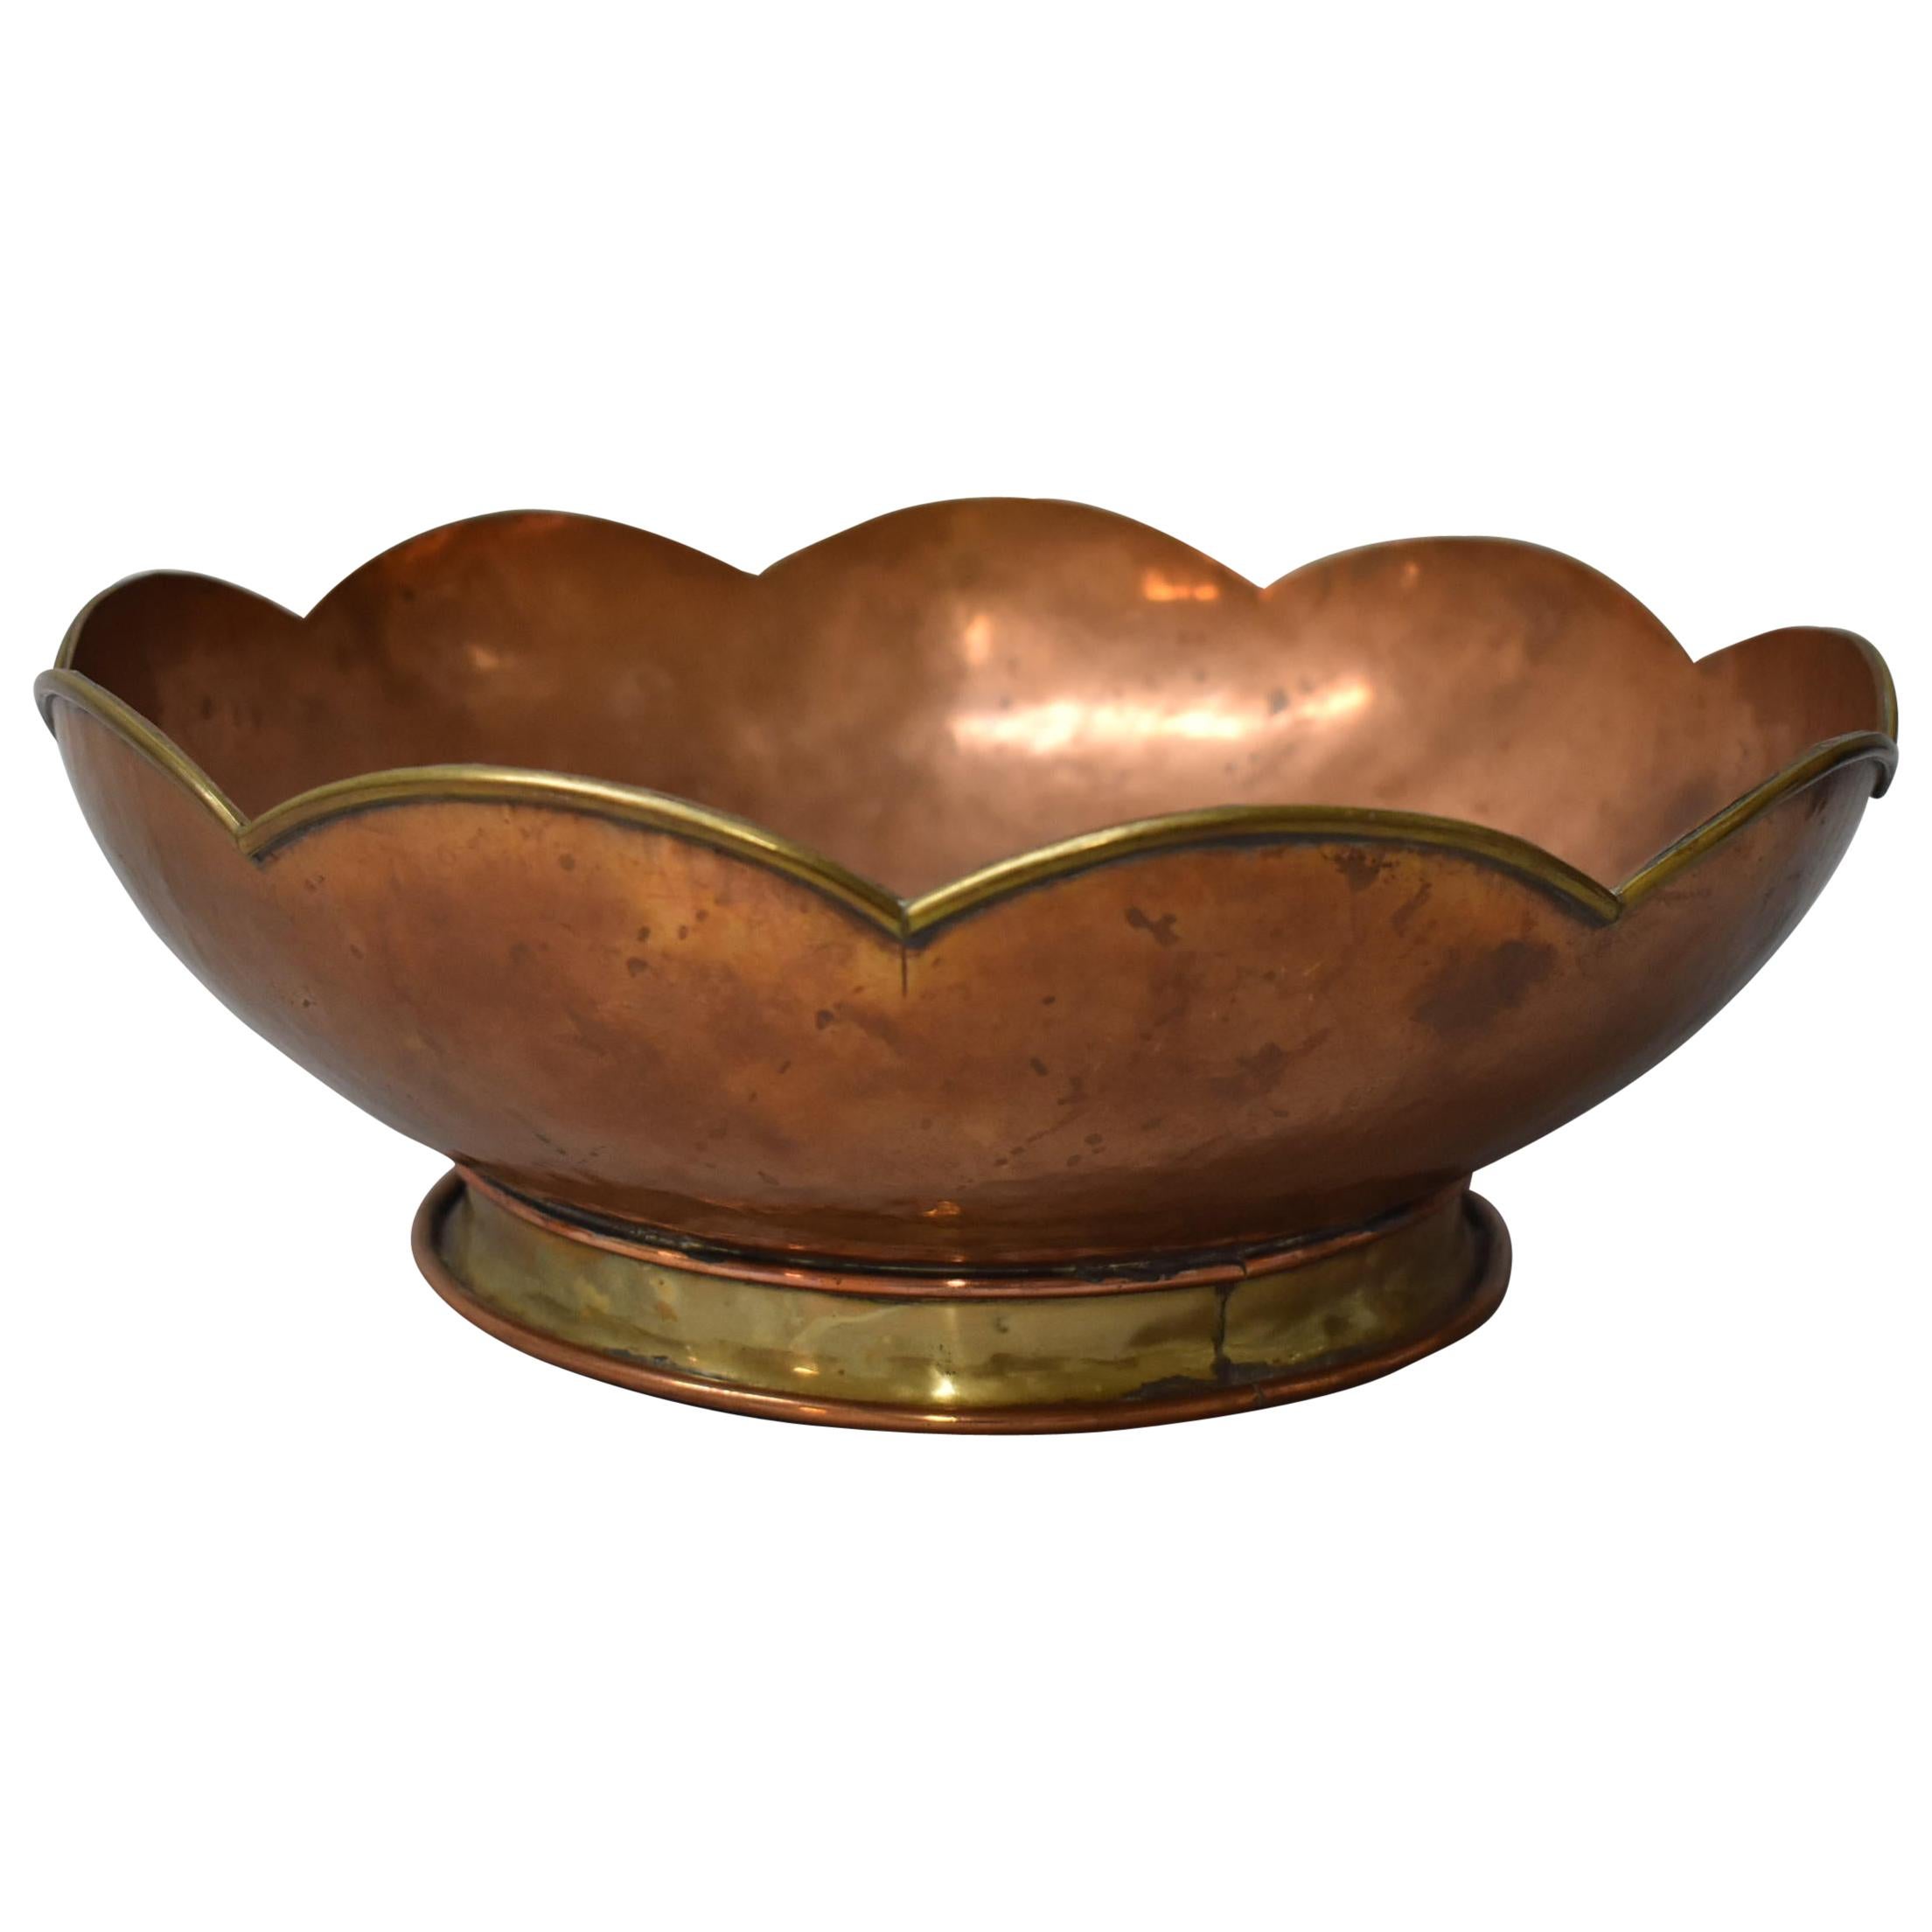 Hector Aquilar Taxco Mexico Copper and Brass Scalloped Bowl